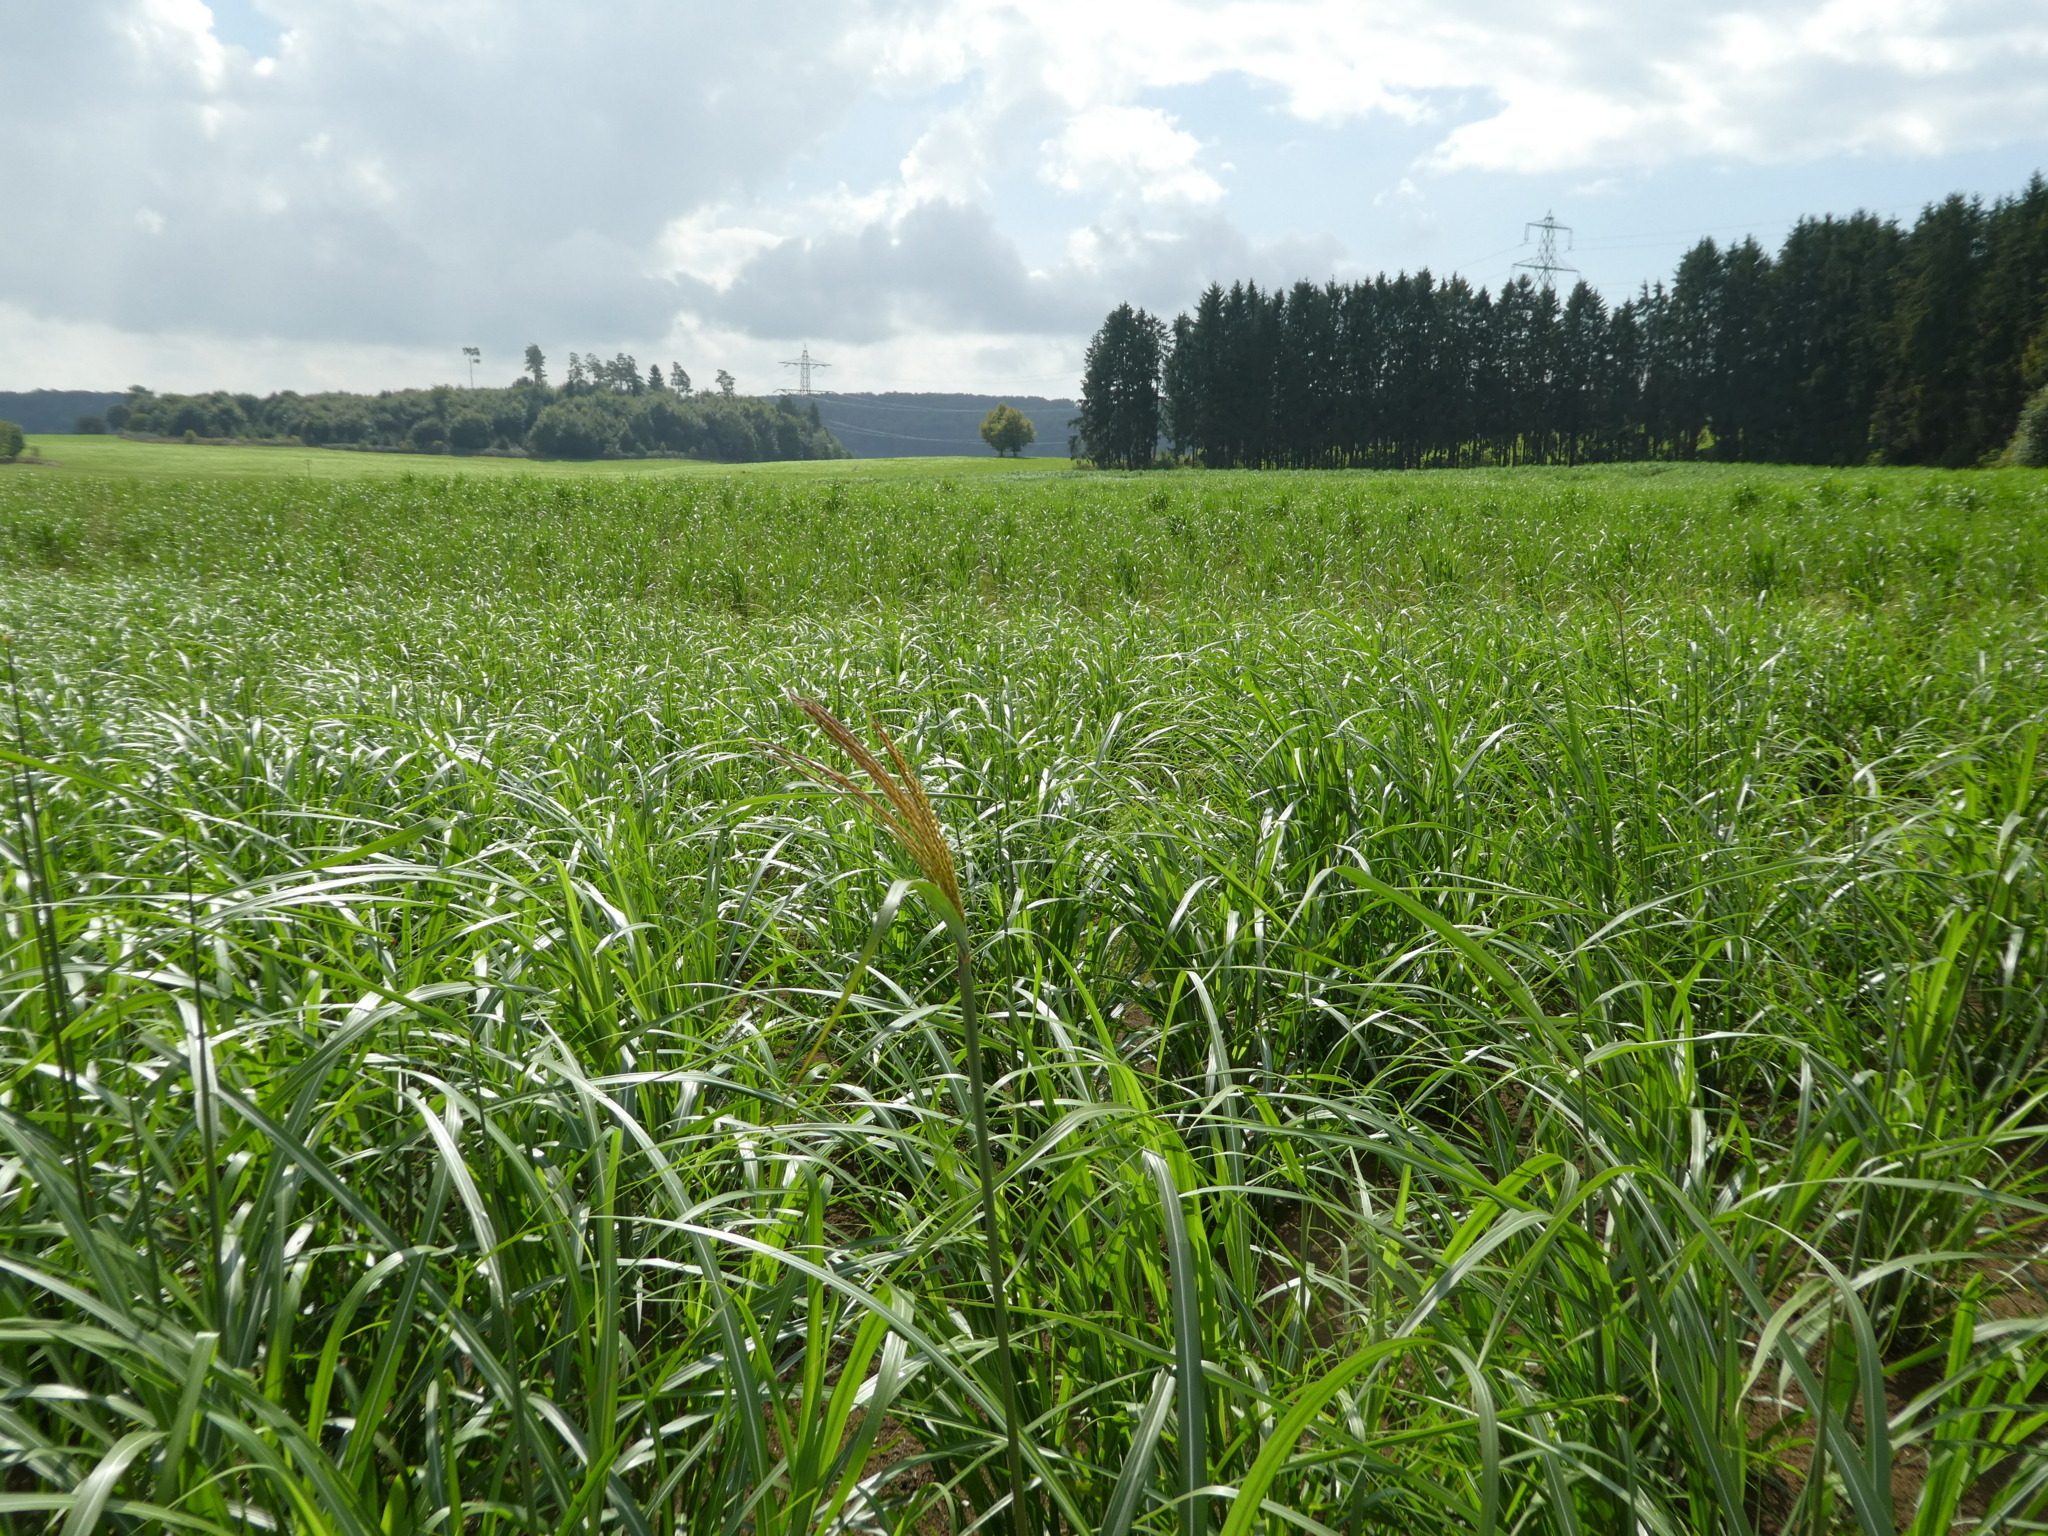 Photo taken from within a miscanthus field: grass-like, green plants in the first third; in the centre, a plant with blossoms consisting with dense, terminal panicles.